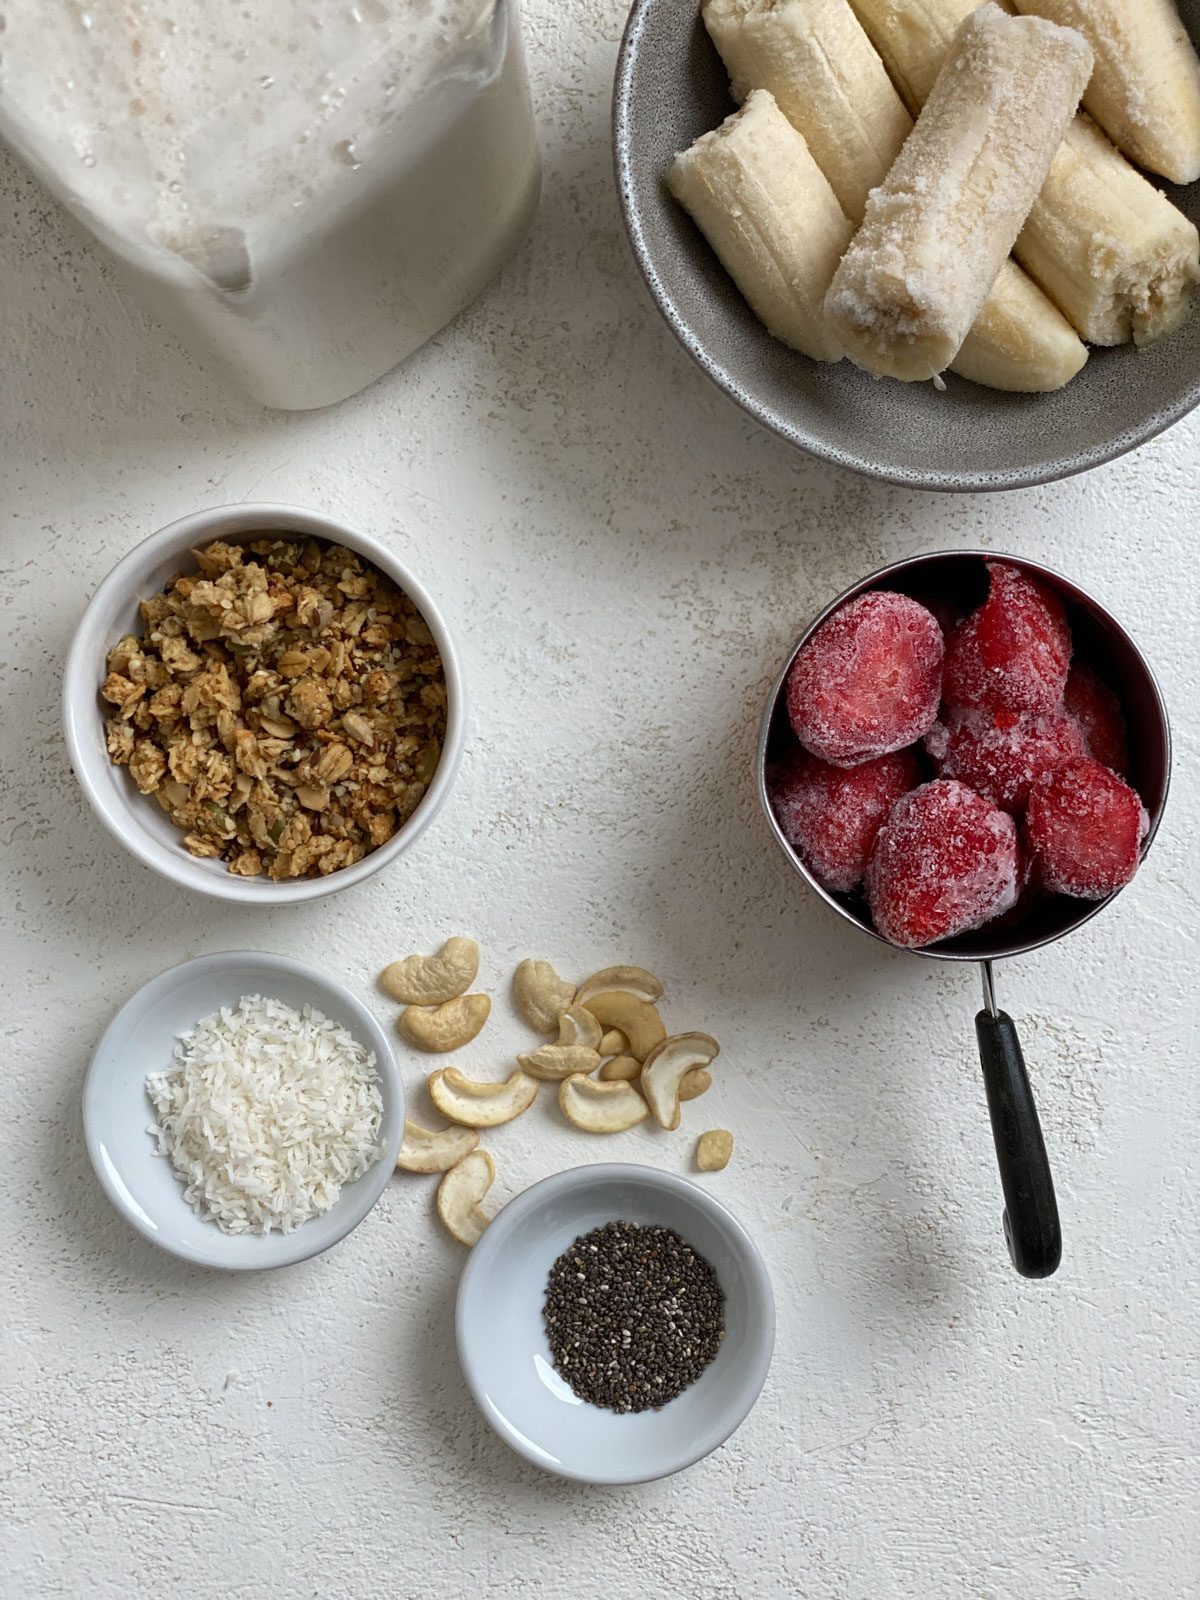 ingredients for Strawberry Smoothie Bowl against a white surface